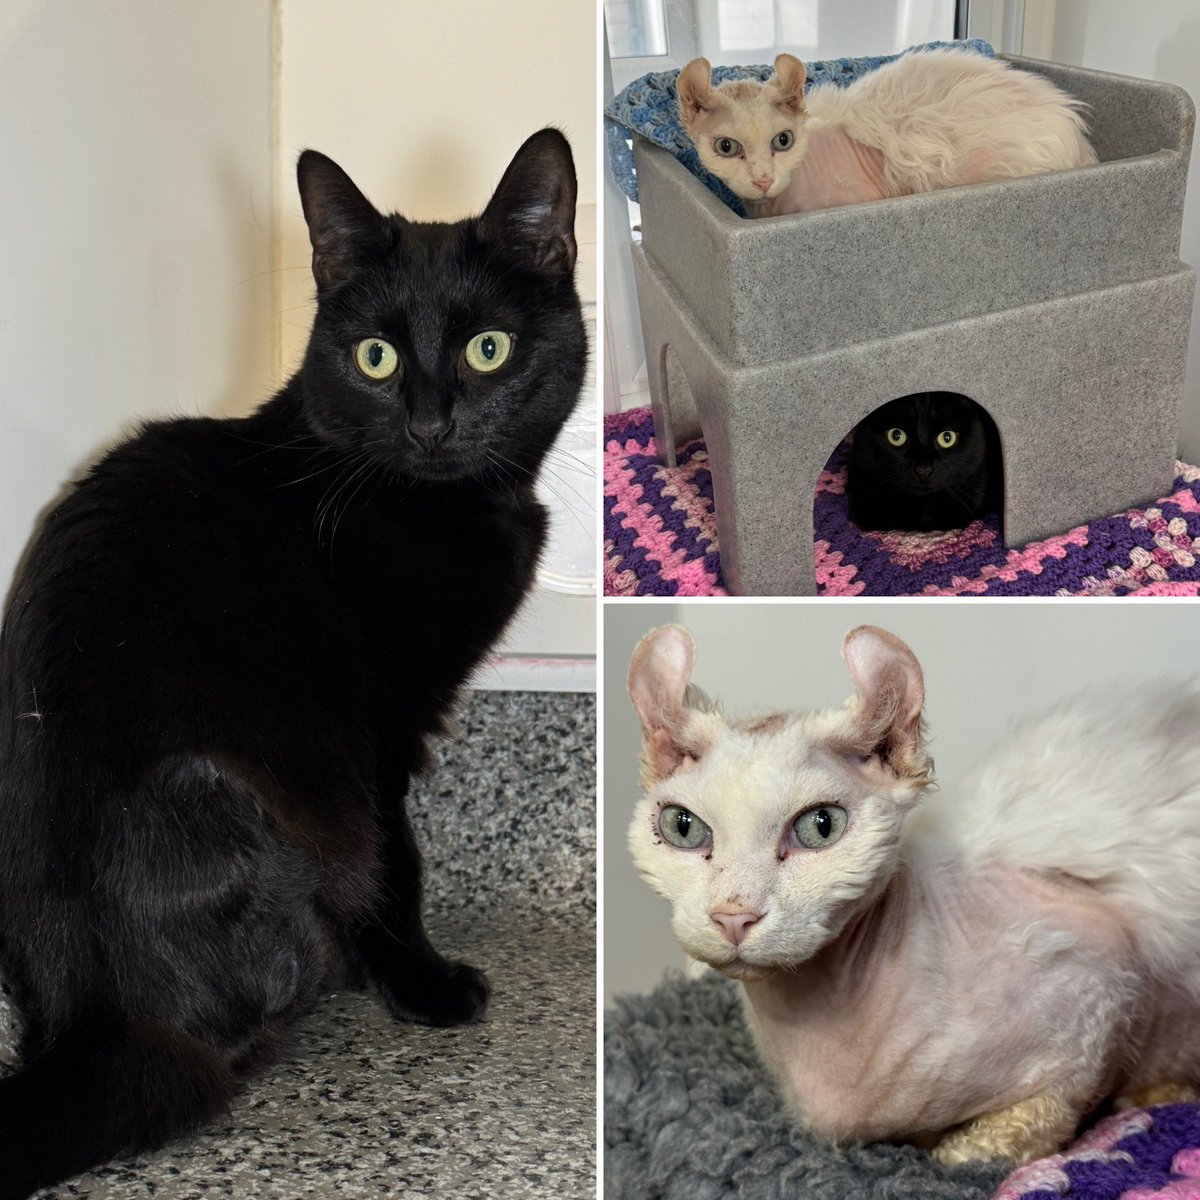 Minky (3) 🖤 & Ziggi (6) 🤍 Our unique bonded duo are looking for an adult only home, together. Minky has 3 legs and a little shy, whilst Ziggi is straight on your lap. Please follow the link to find out more bitly.ws/FTAM #CatsOnX #CatsOnTwitter #CatsProtection